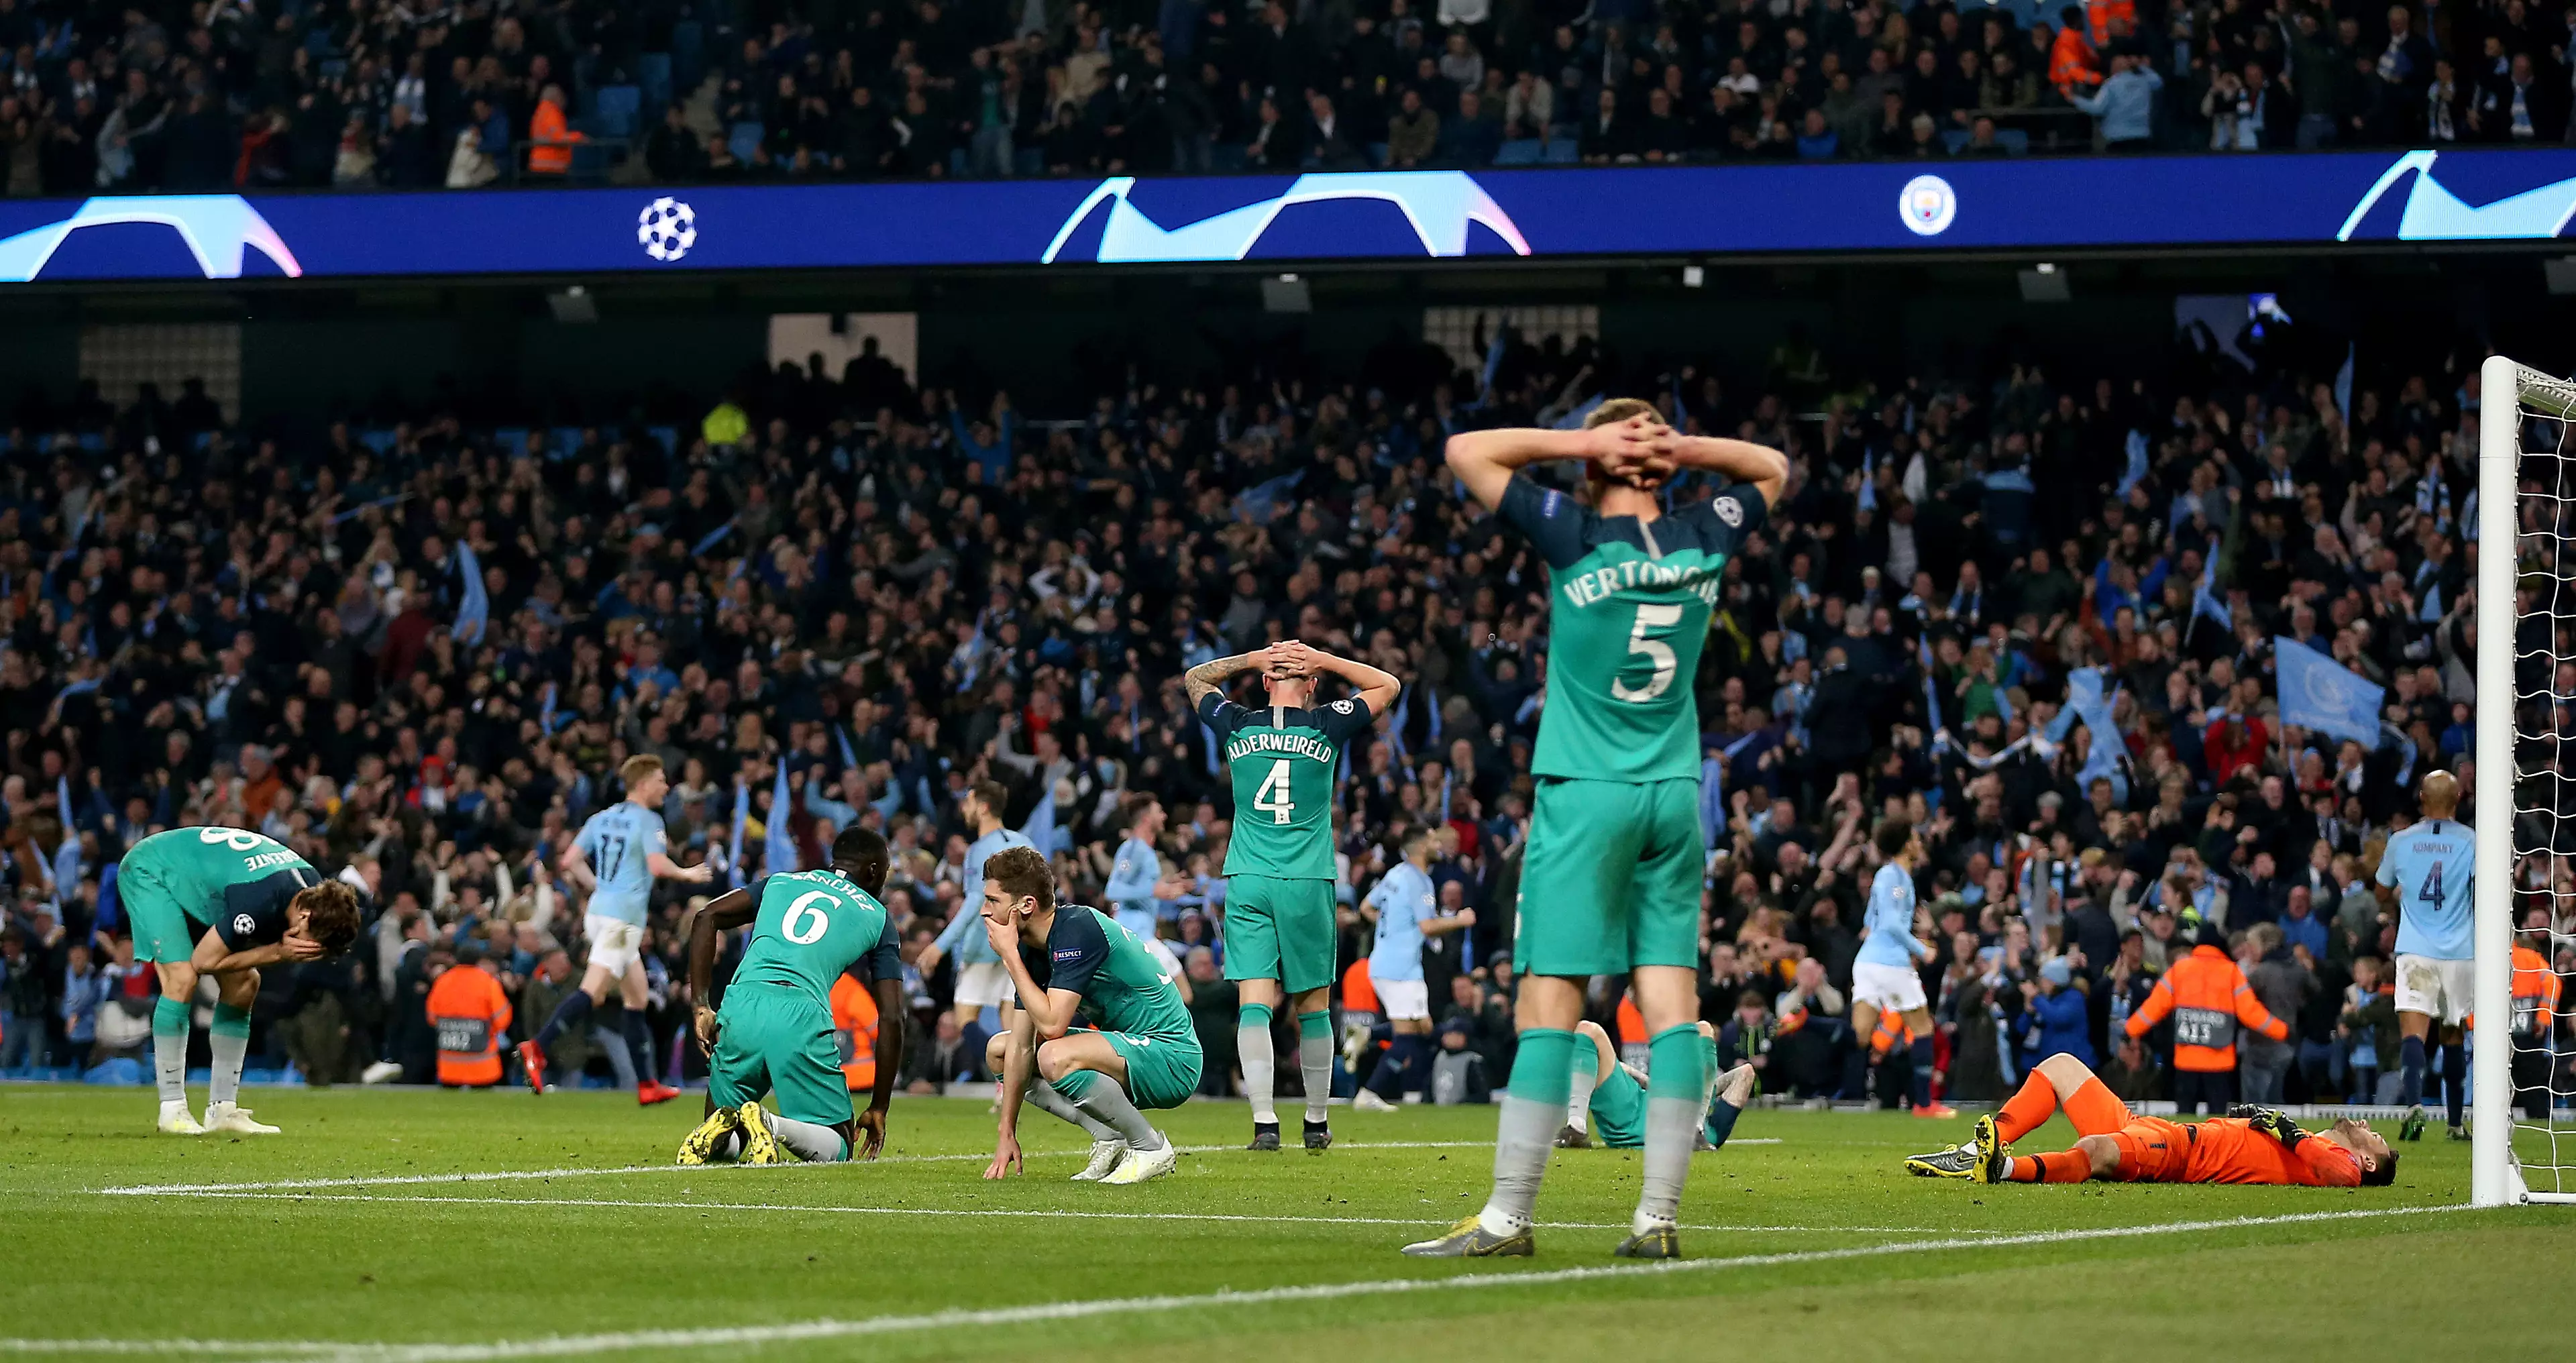 Spurs players thinking they'd been knocked out of the Champions League. Image: PA Images